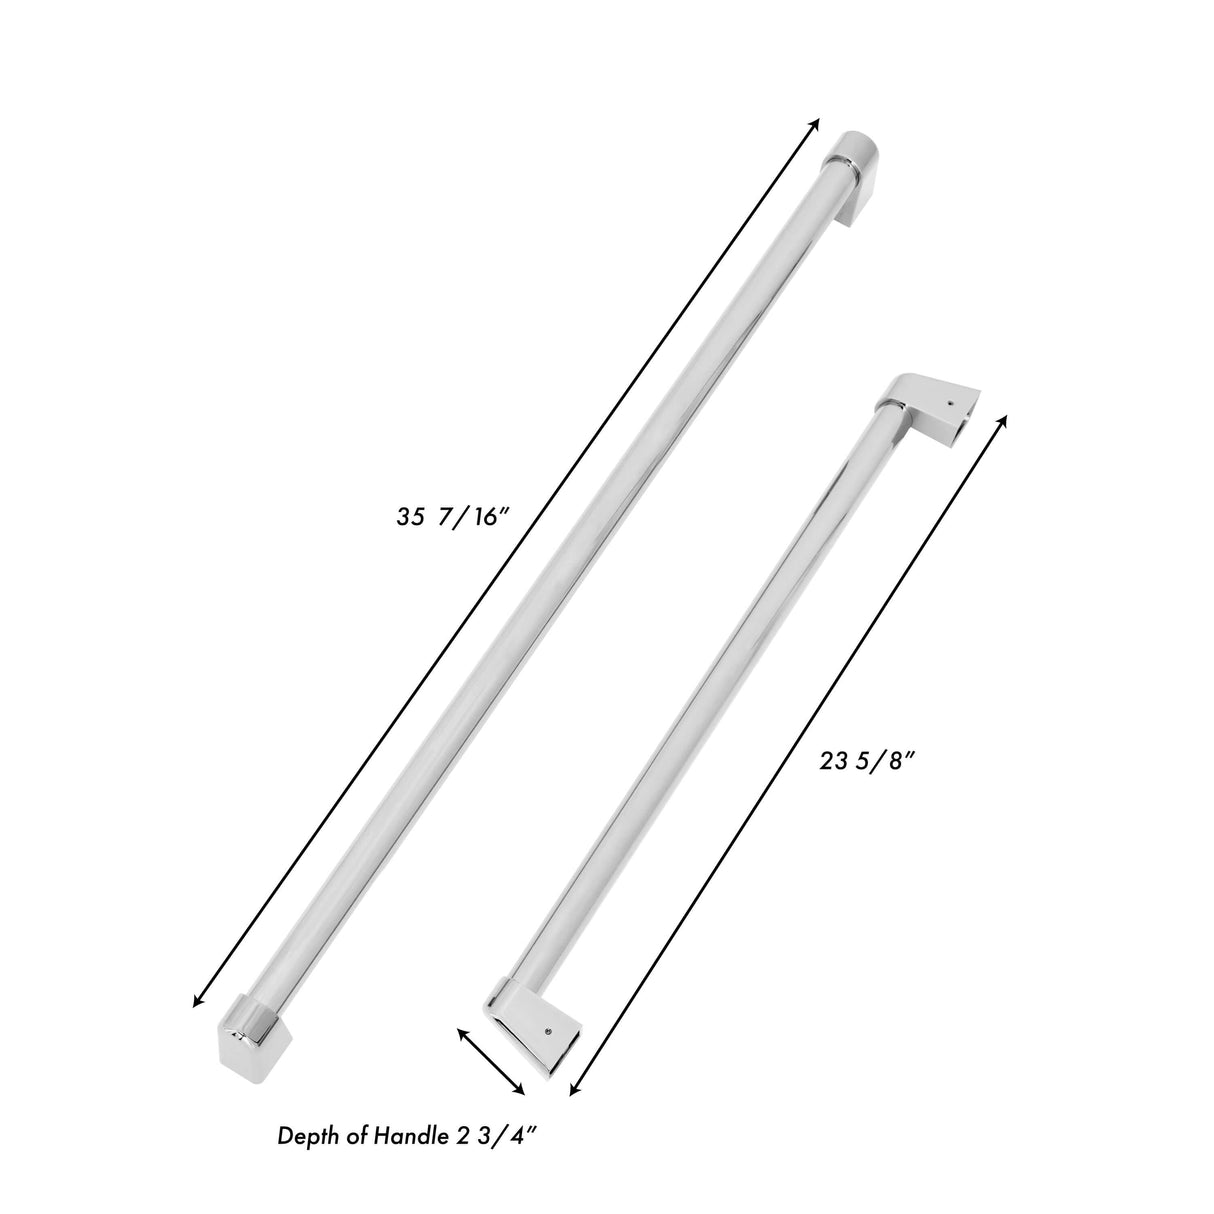 ZLINE 30 in. Refrigerator Panels and Handles in Stainless Steel for Built-in Refrigerators (RPBIV-304-30)